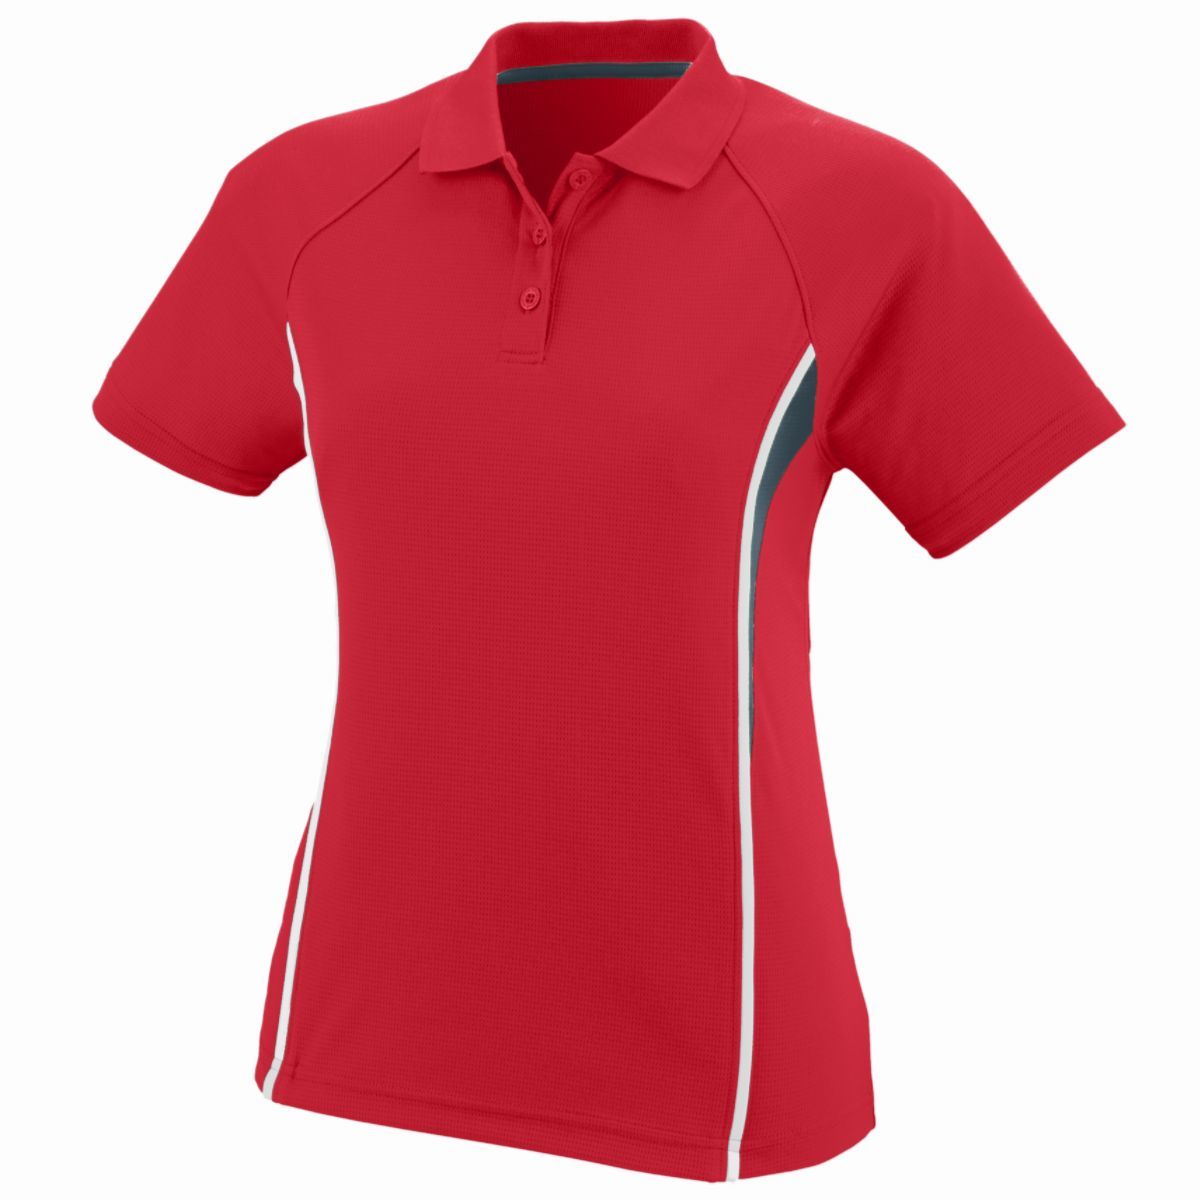 Augusta Sportswear Ladies Rival Polo in Red/Slate/White  -Part of the Ladies, Ladies-Polo, Polos, Augusta-Products, Shirts product lines at KanaleyCreations.com